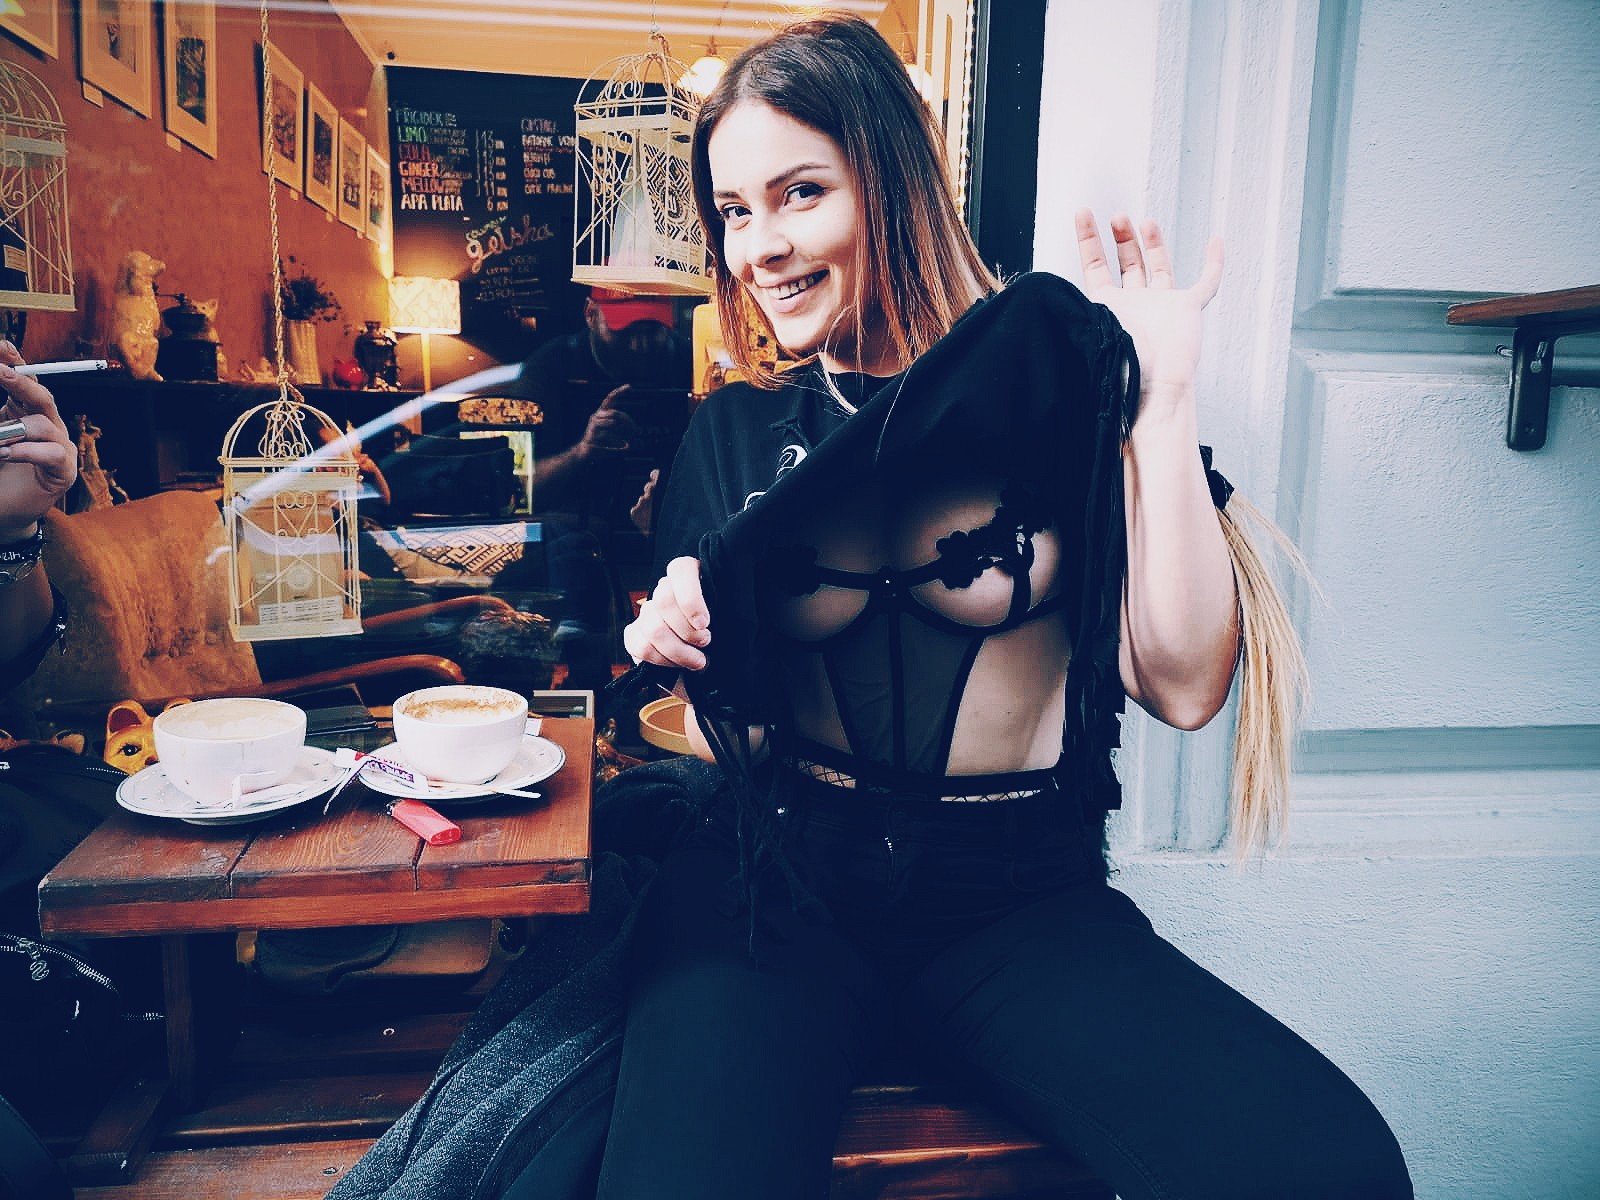 Photo by TamTam with the username @TamTam, who is a star user,  October 11, 2018 at 3:00 PM. The post is about the topic Girls You Dream Of and the text says 'Got my boobs out for a coffee at @milucafebucharest 
#wesharesome
#awsomeness
#boobs
#hot
#chick
#damn
Getting ready for the challanges ???❤️?yass'